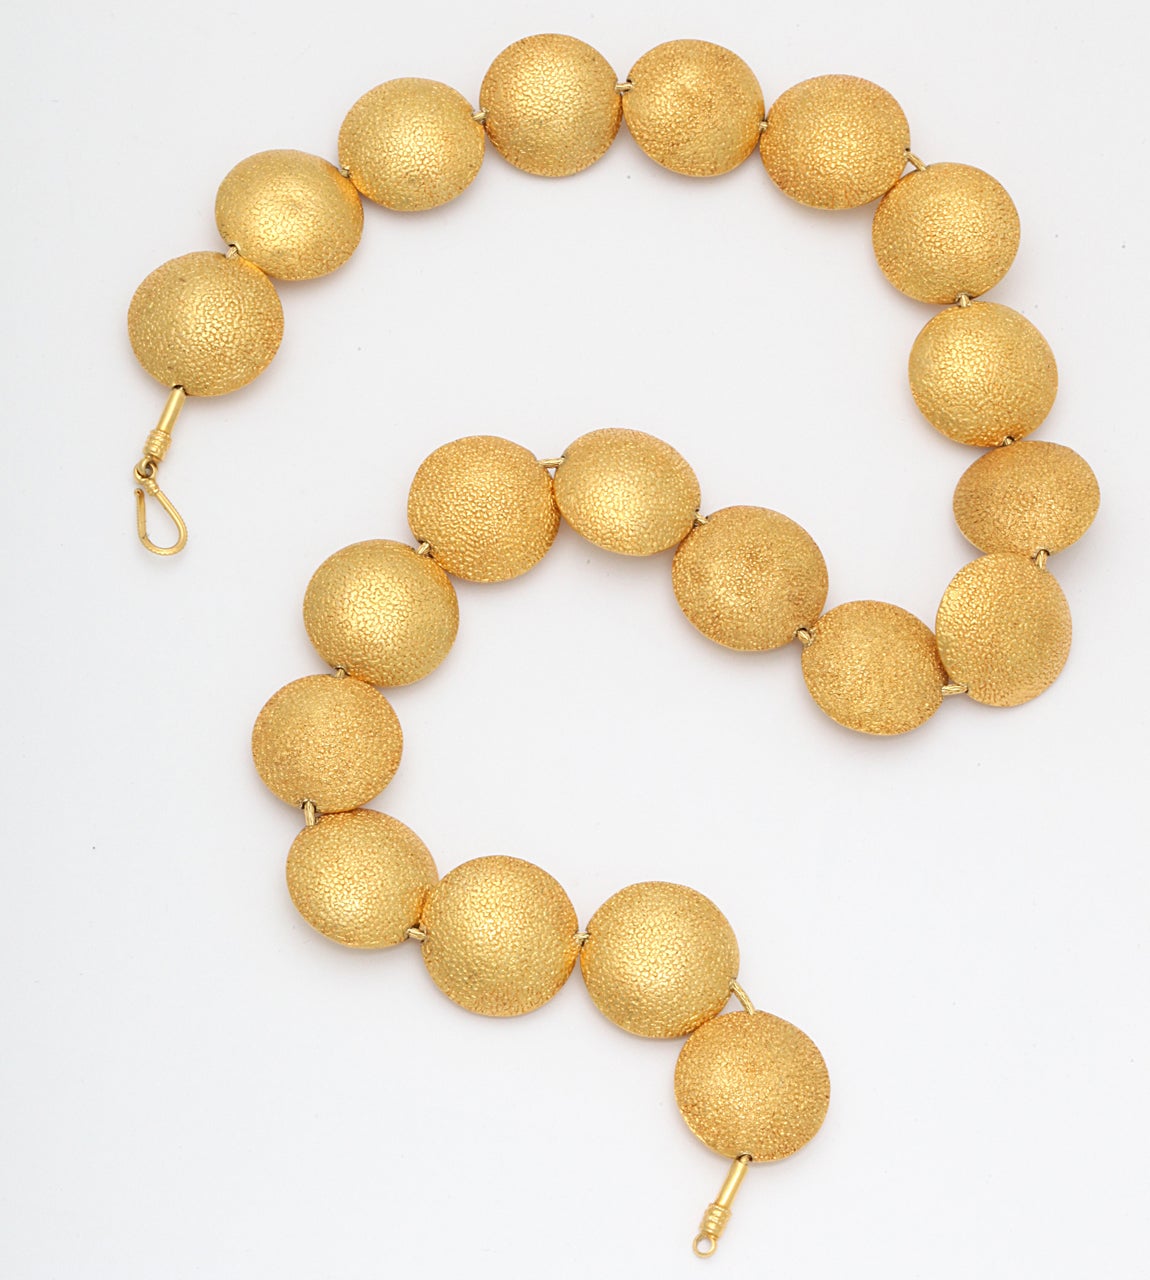 A necklace composed of twenty 18kt yellow gold lozenge beads strung onto an 18kt yellow gold snake necklace.